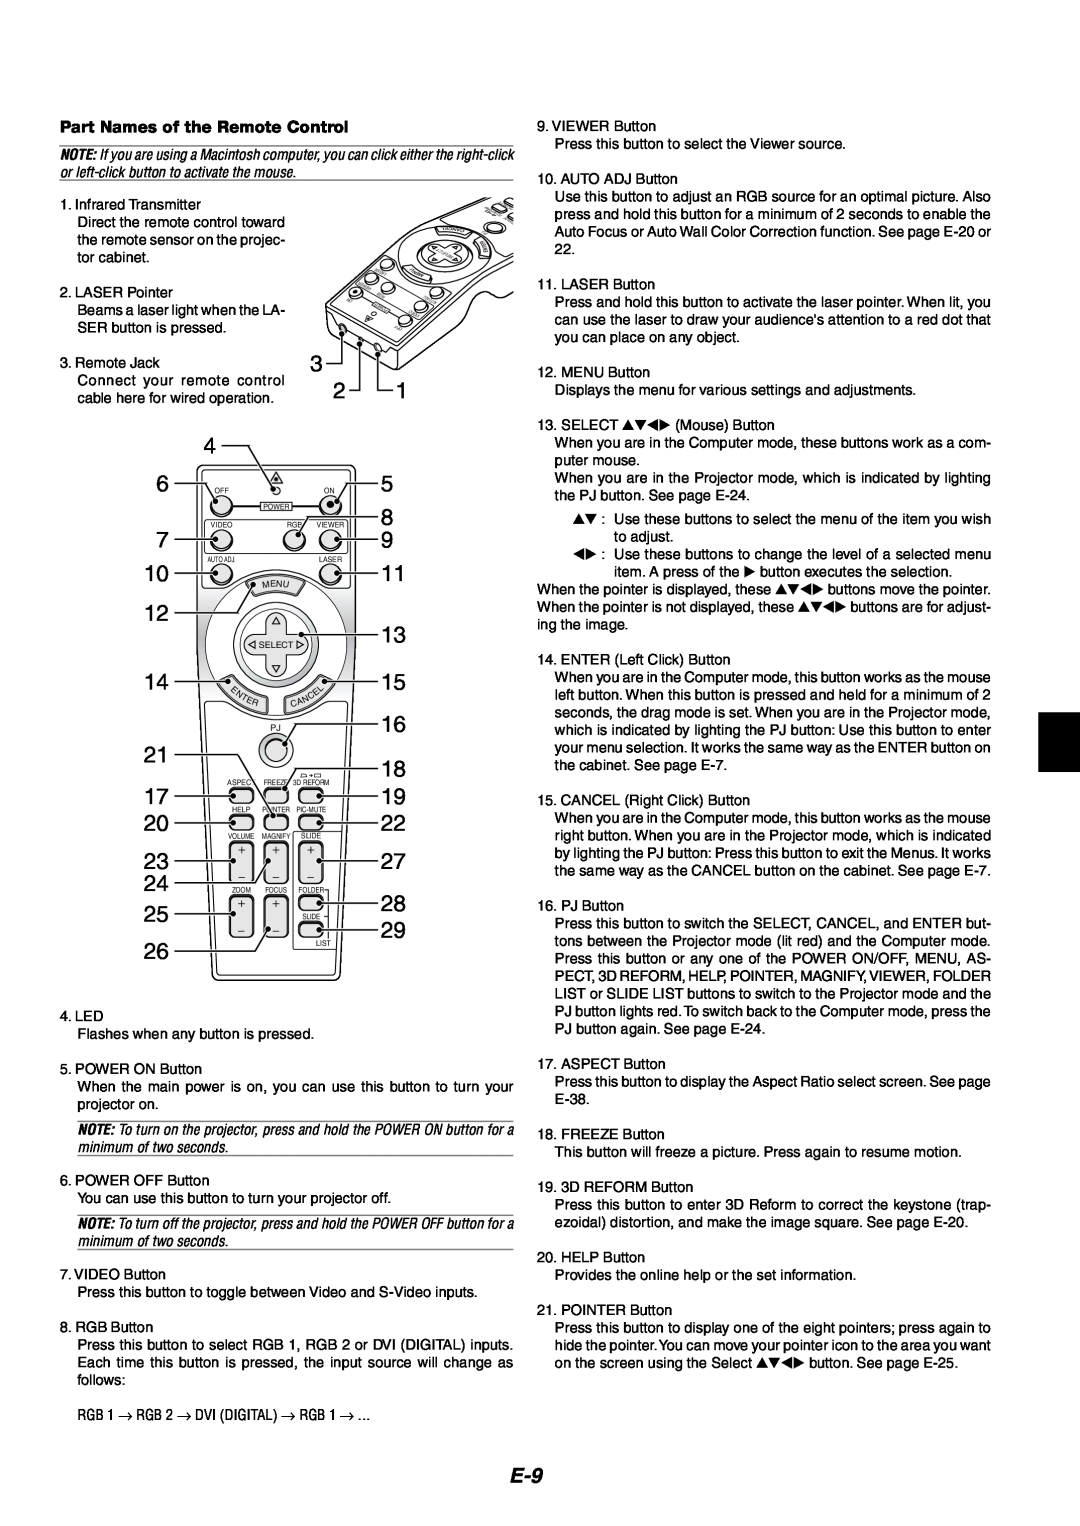 NEC MT1060 user manual Part Names of the Remote Control 